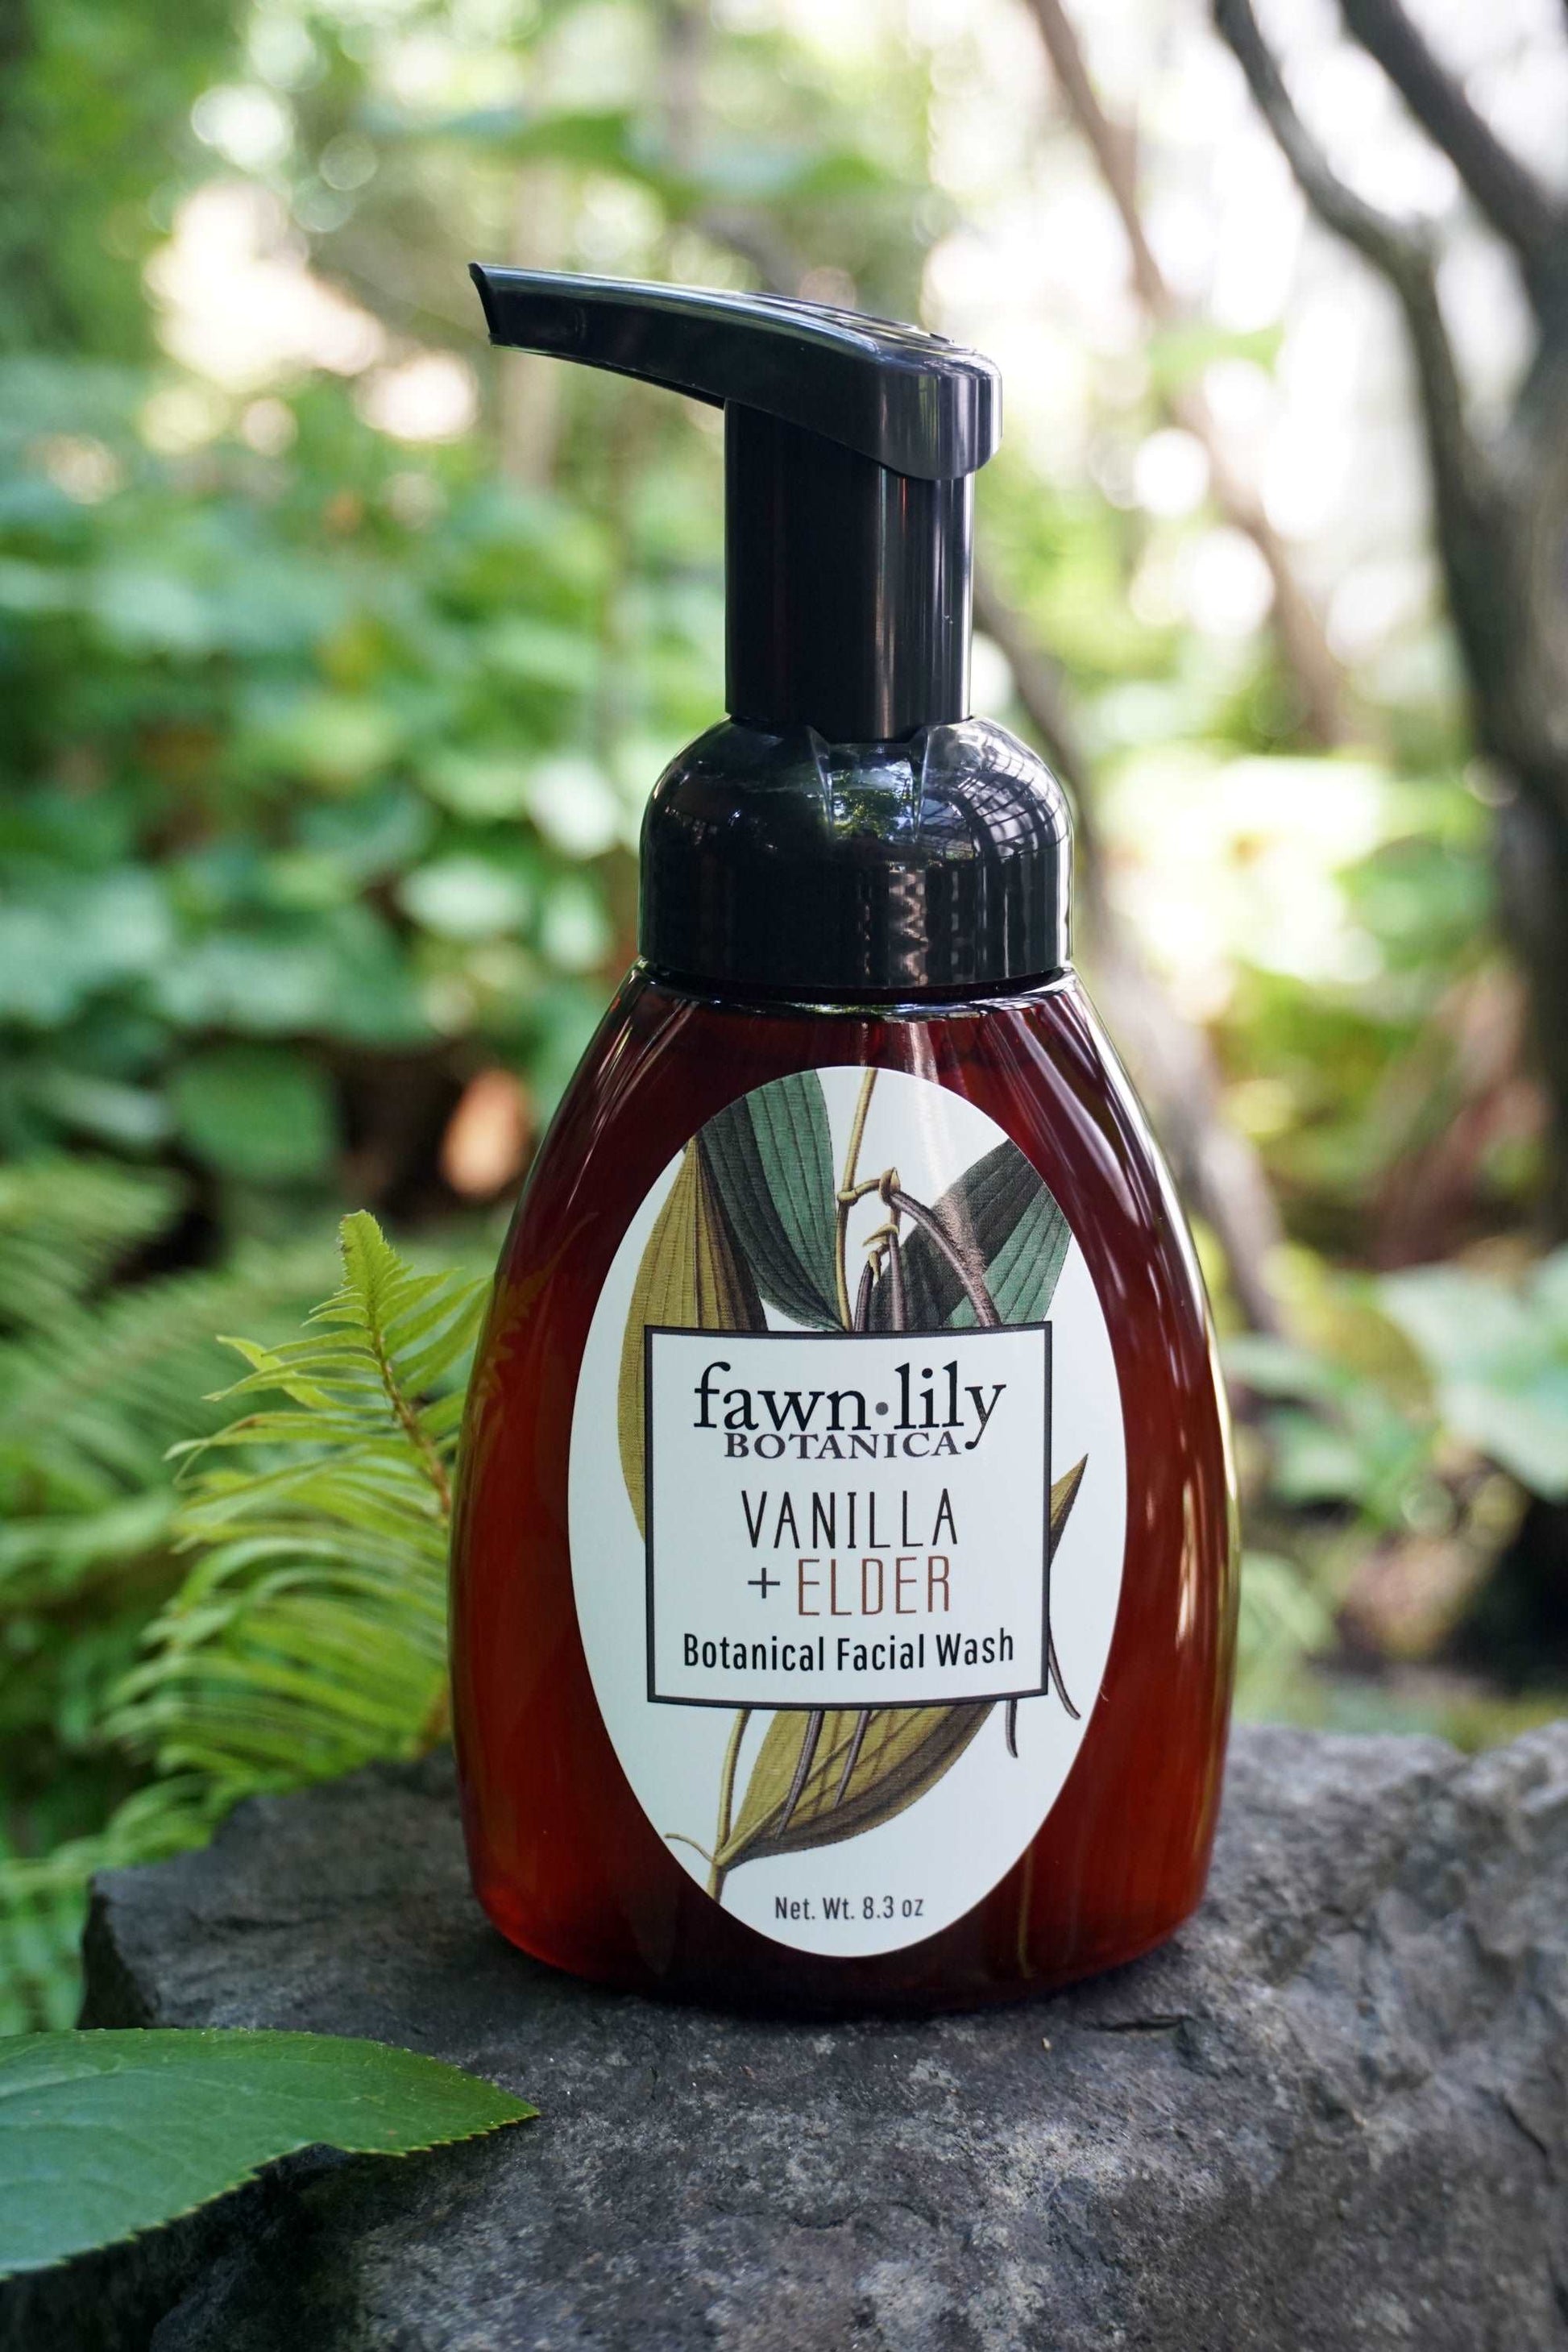 Vanilla Elder Flower Ylang Ylang Botanical Face Wash. Natural face wash cleanser for all skin types with real vanilla beans and ylang ylang flowers. Natural and hydrating formula, handcrafted from organic vegan botanical herbal ingredients.